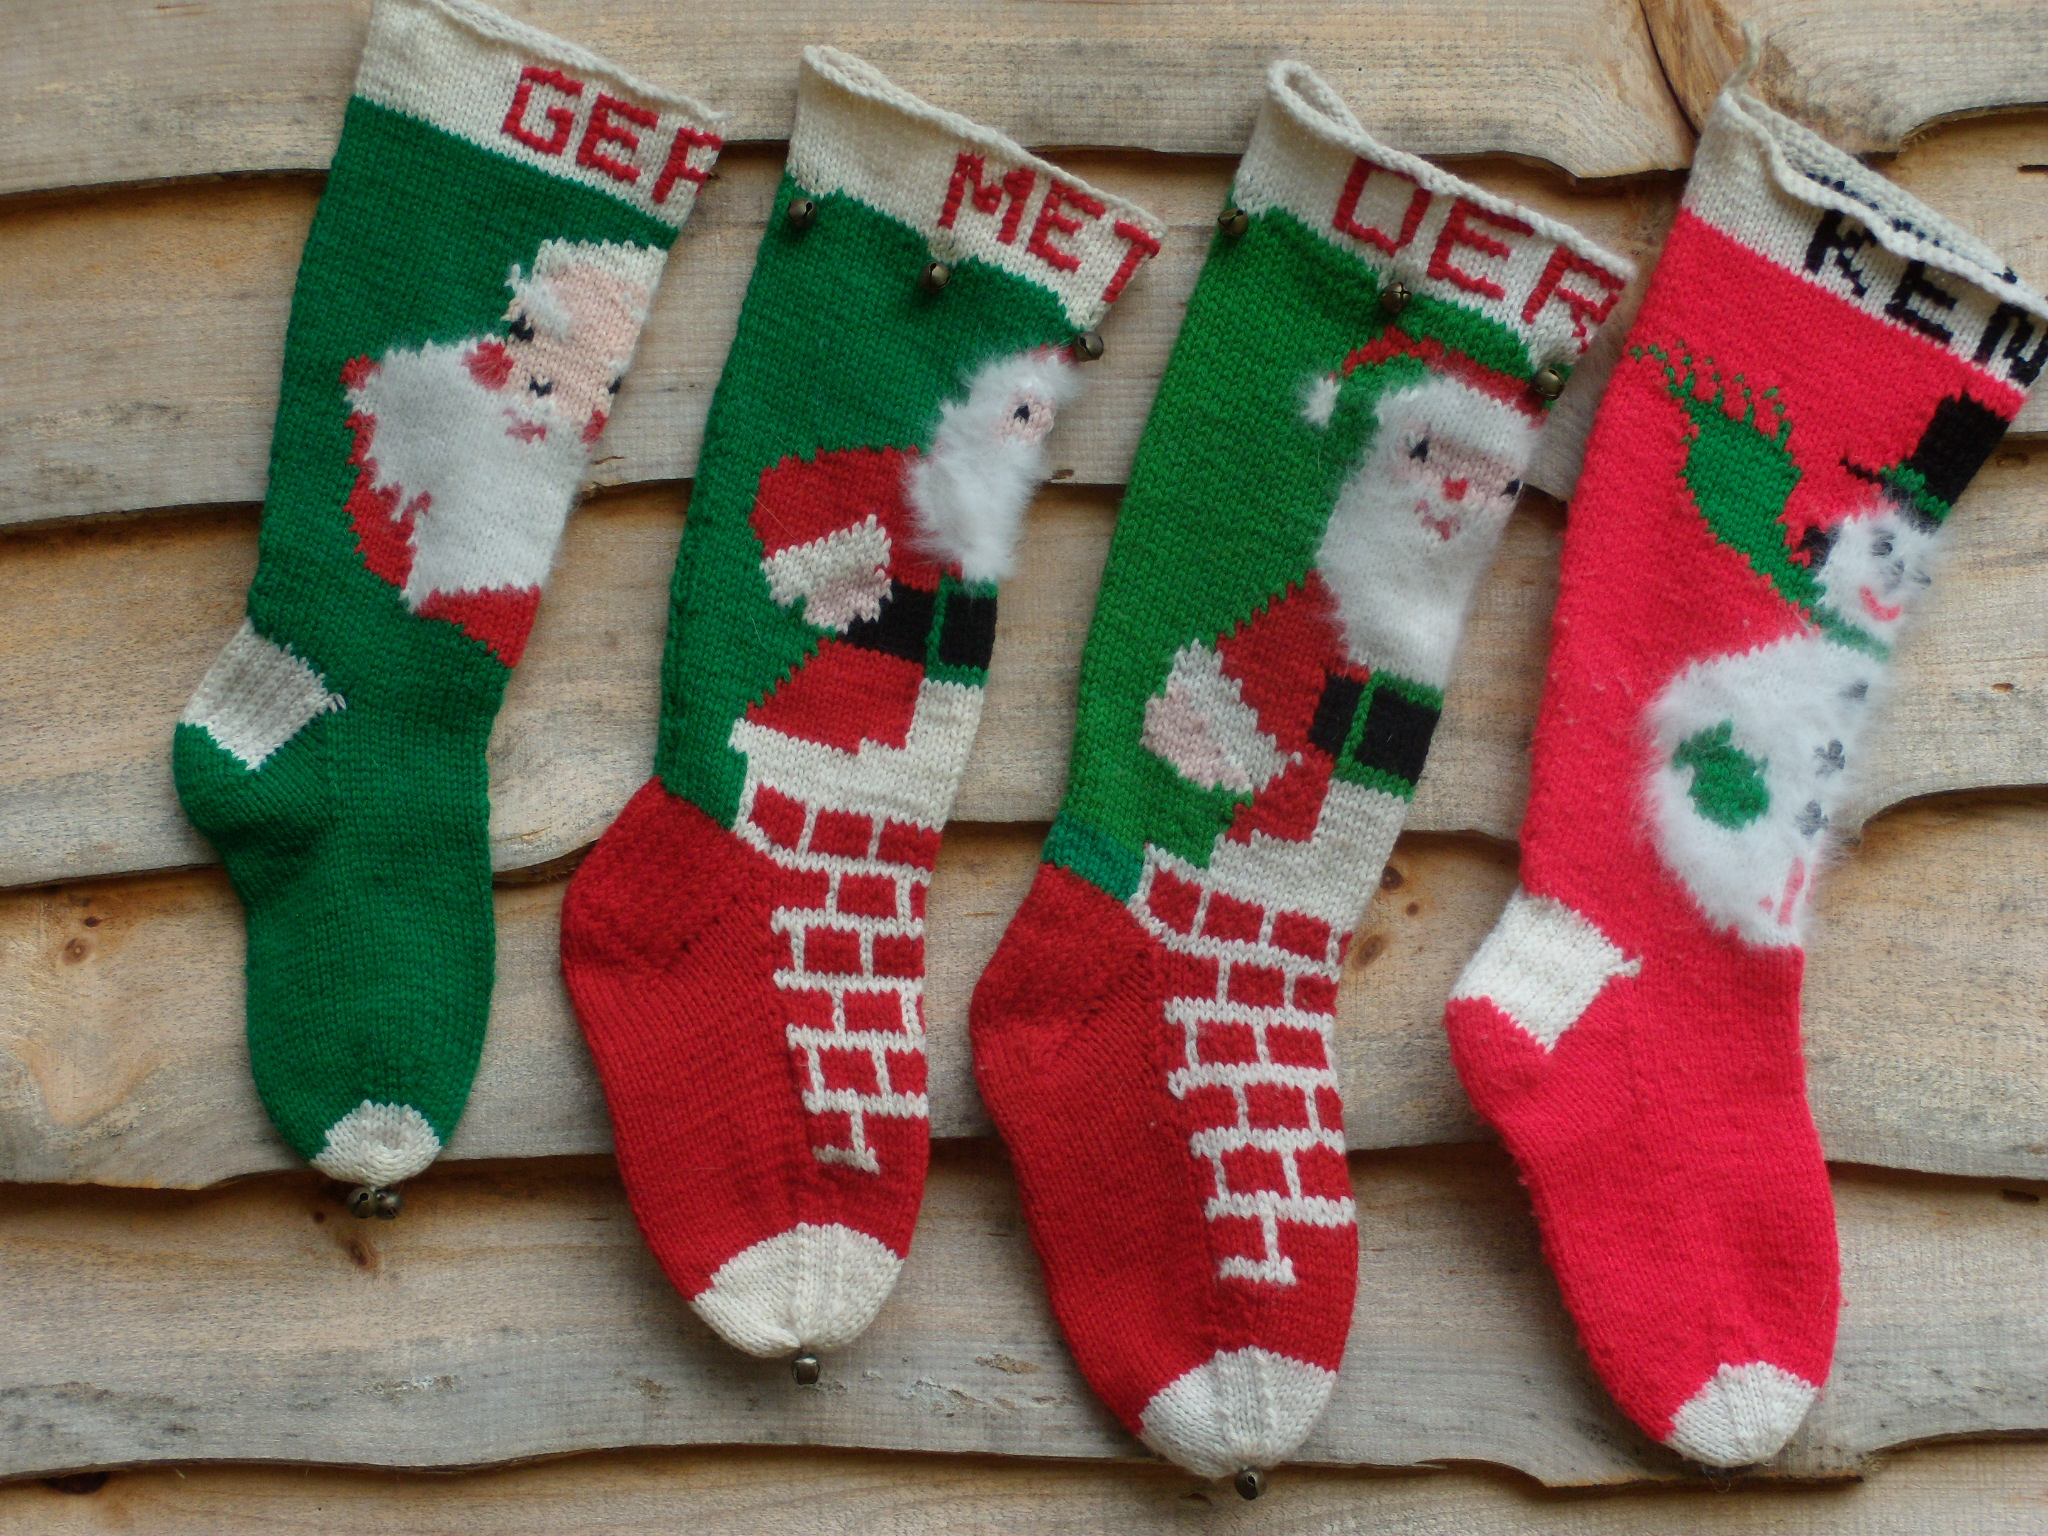 Knitted Christmas Stocking Patterns Personalized Who Made Your Christmas Stockings Halcyon Yarn Blog Halcyon Yarn